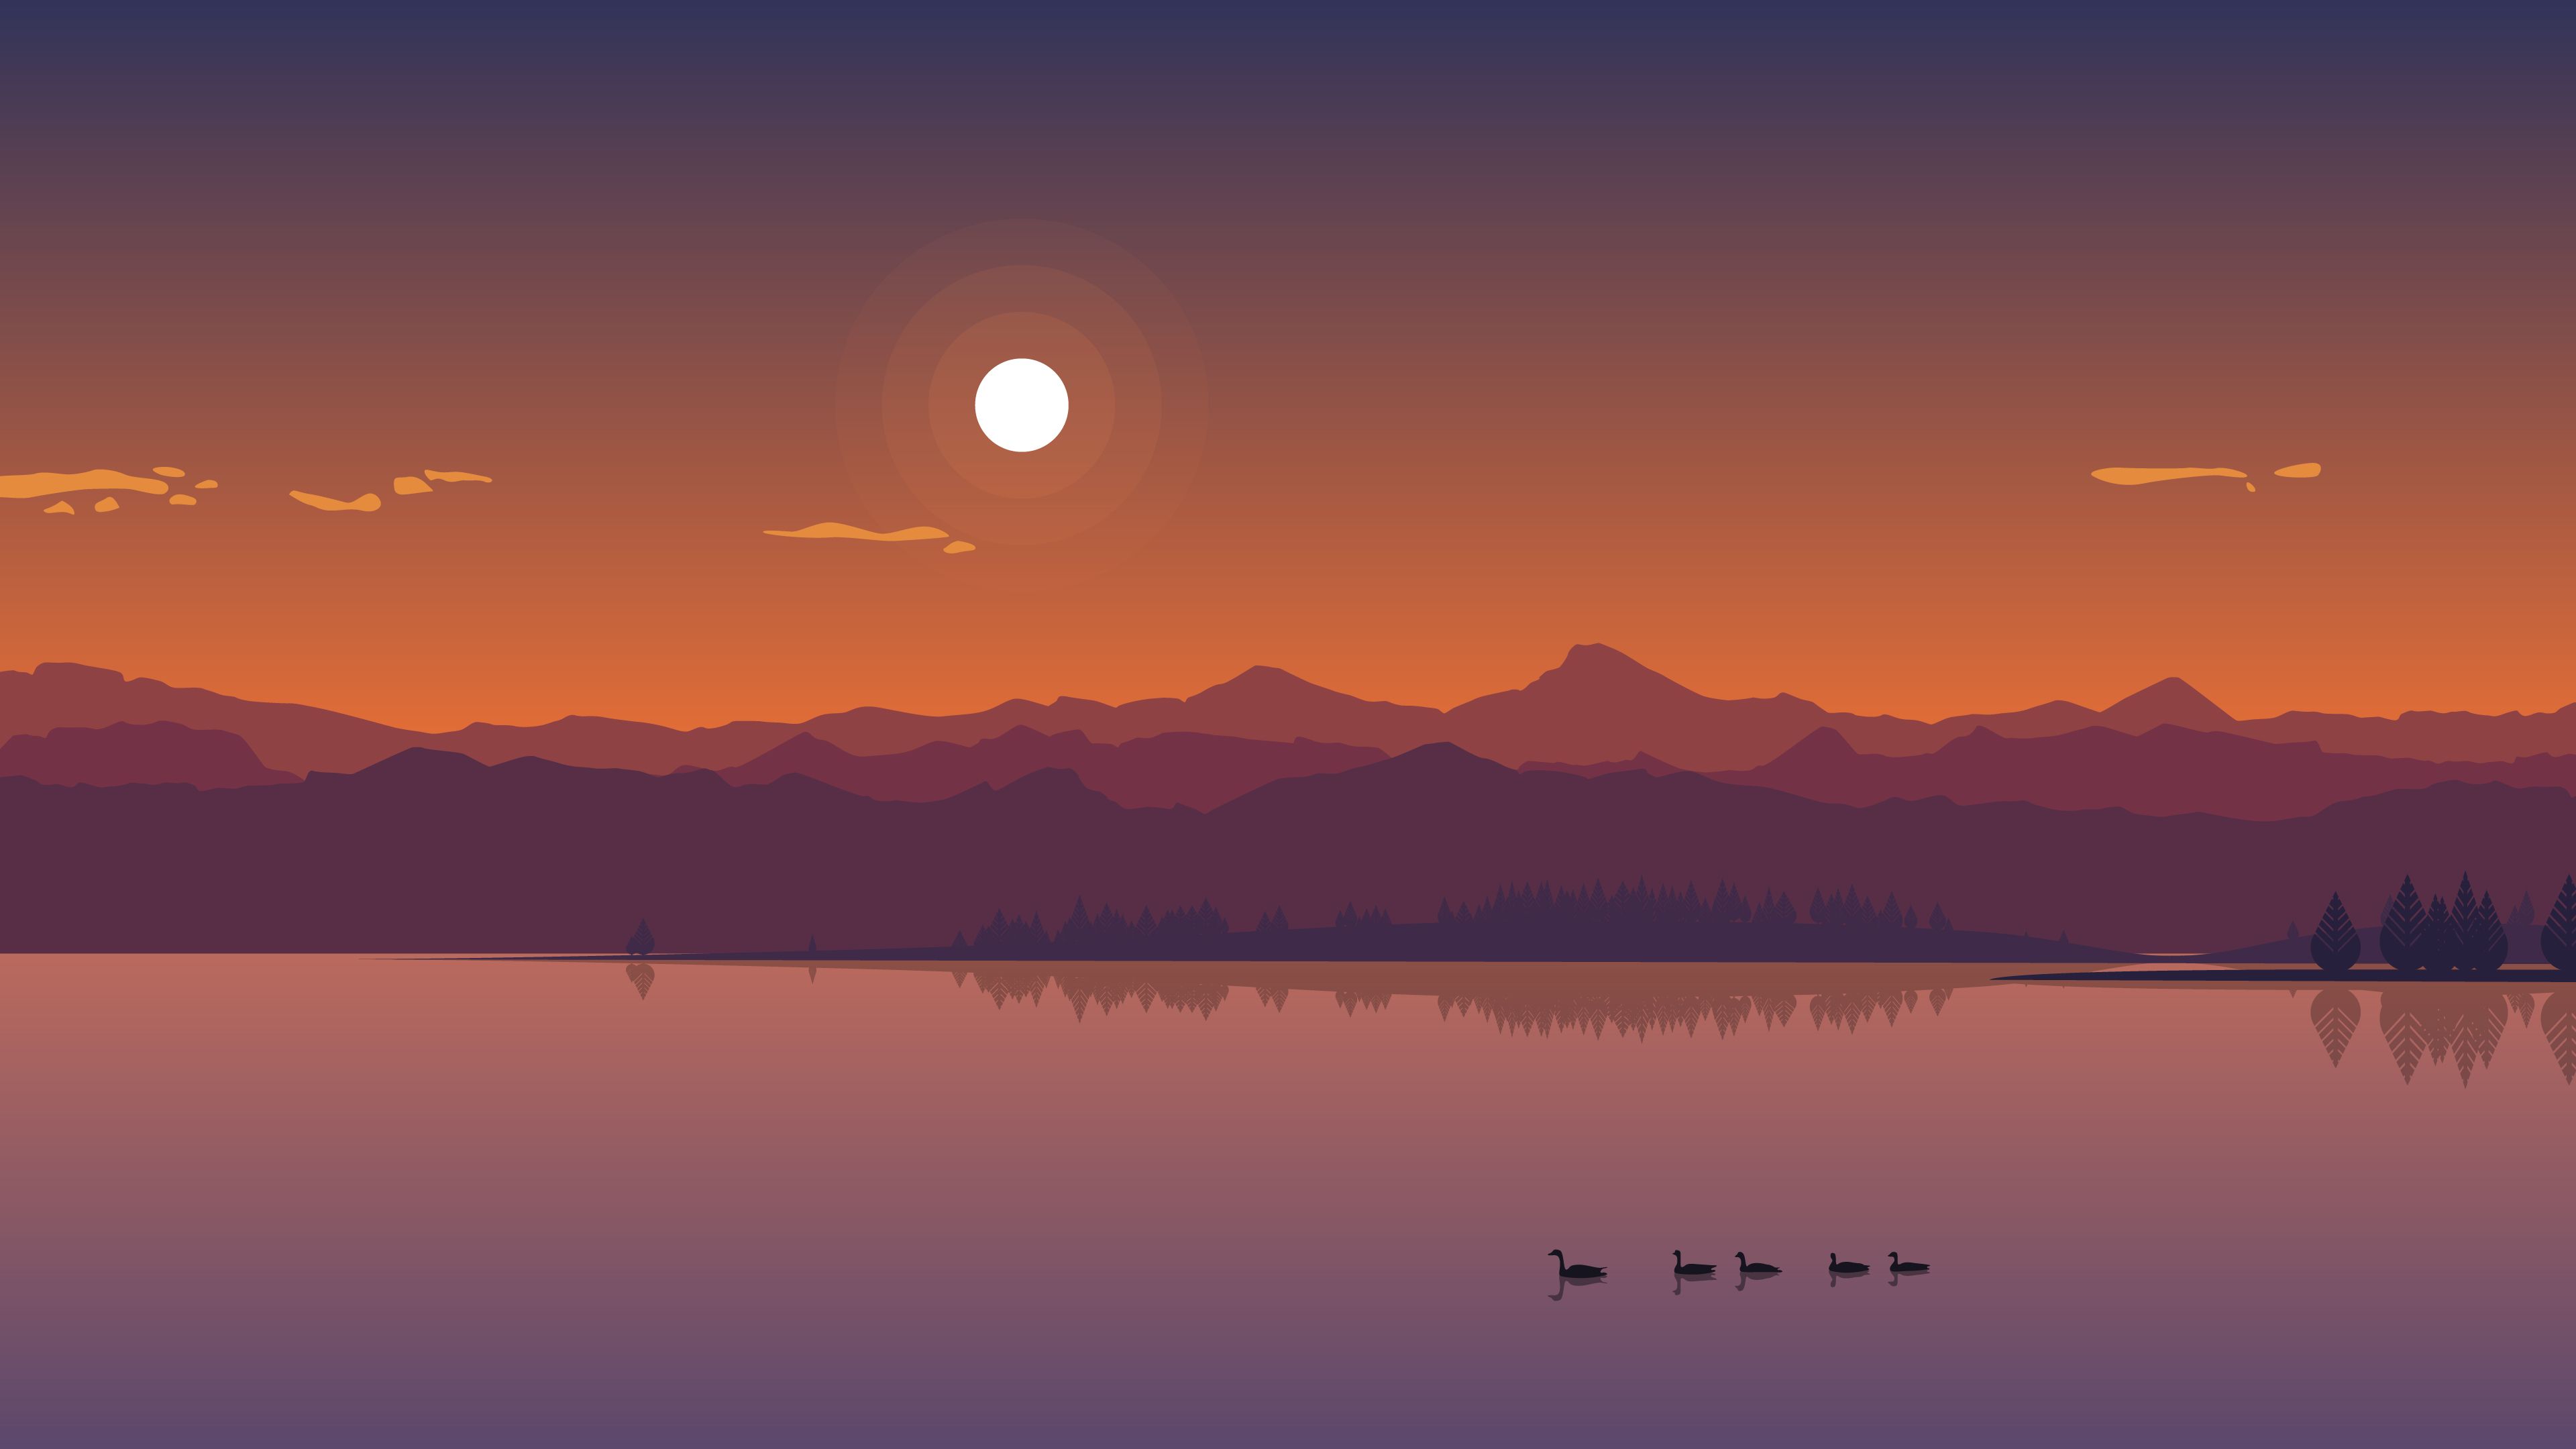 Sunset On The Lake Drawing Wallpapers